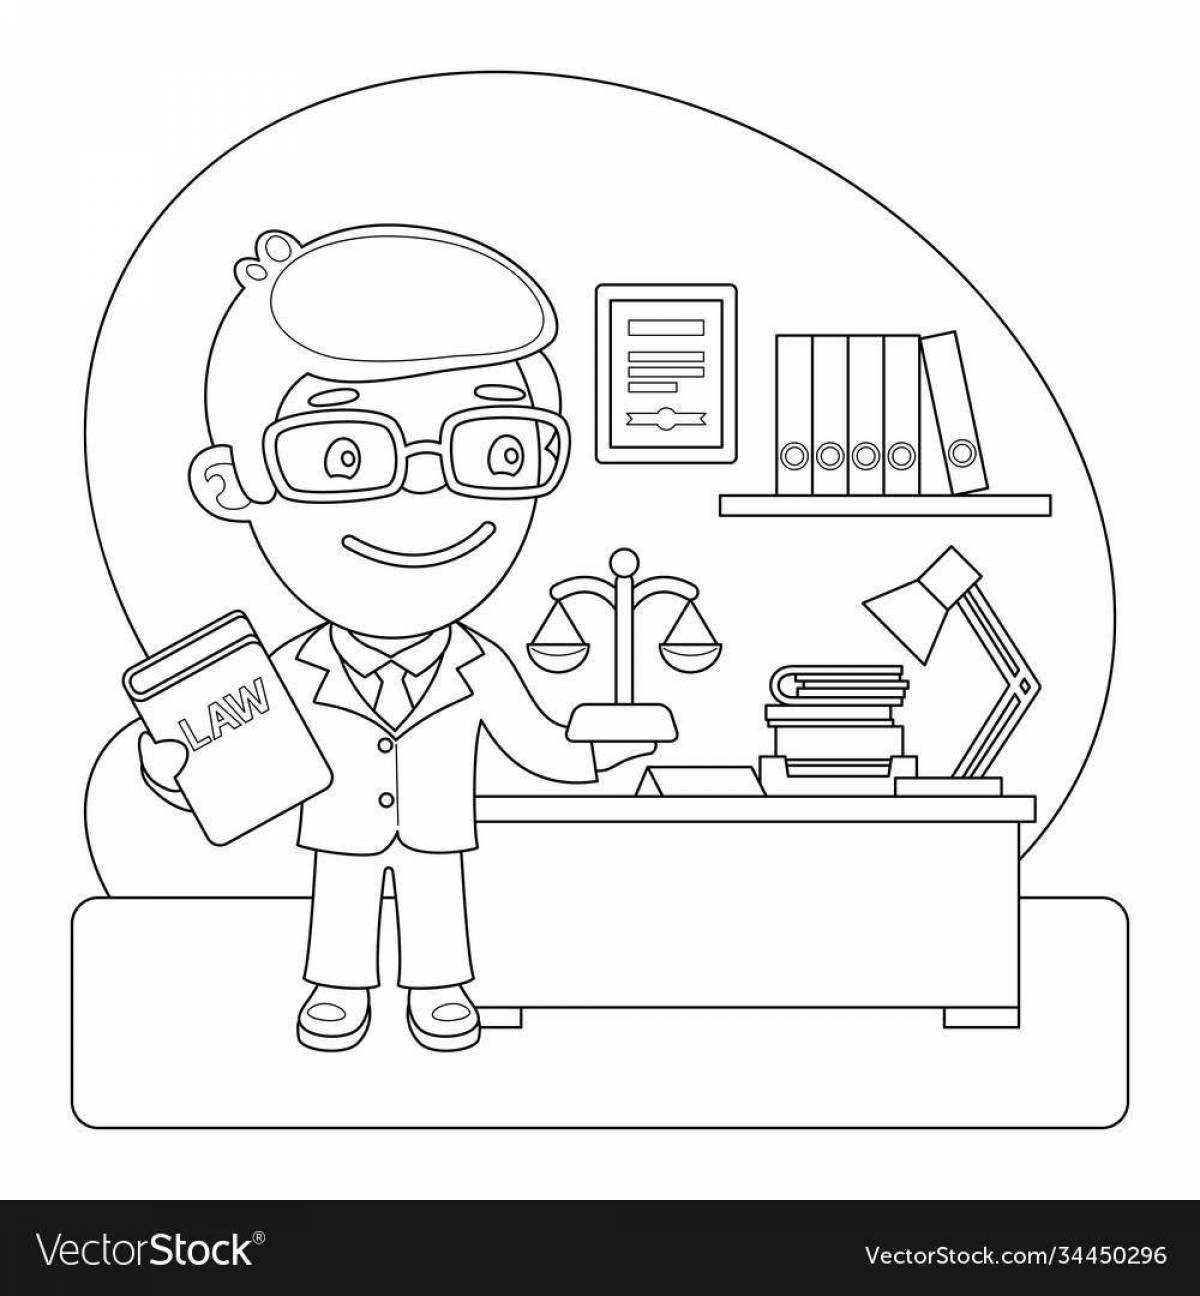 Pharmacist animated coloring page